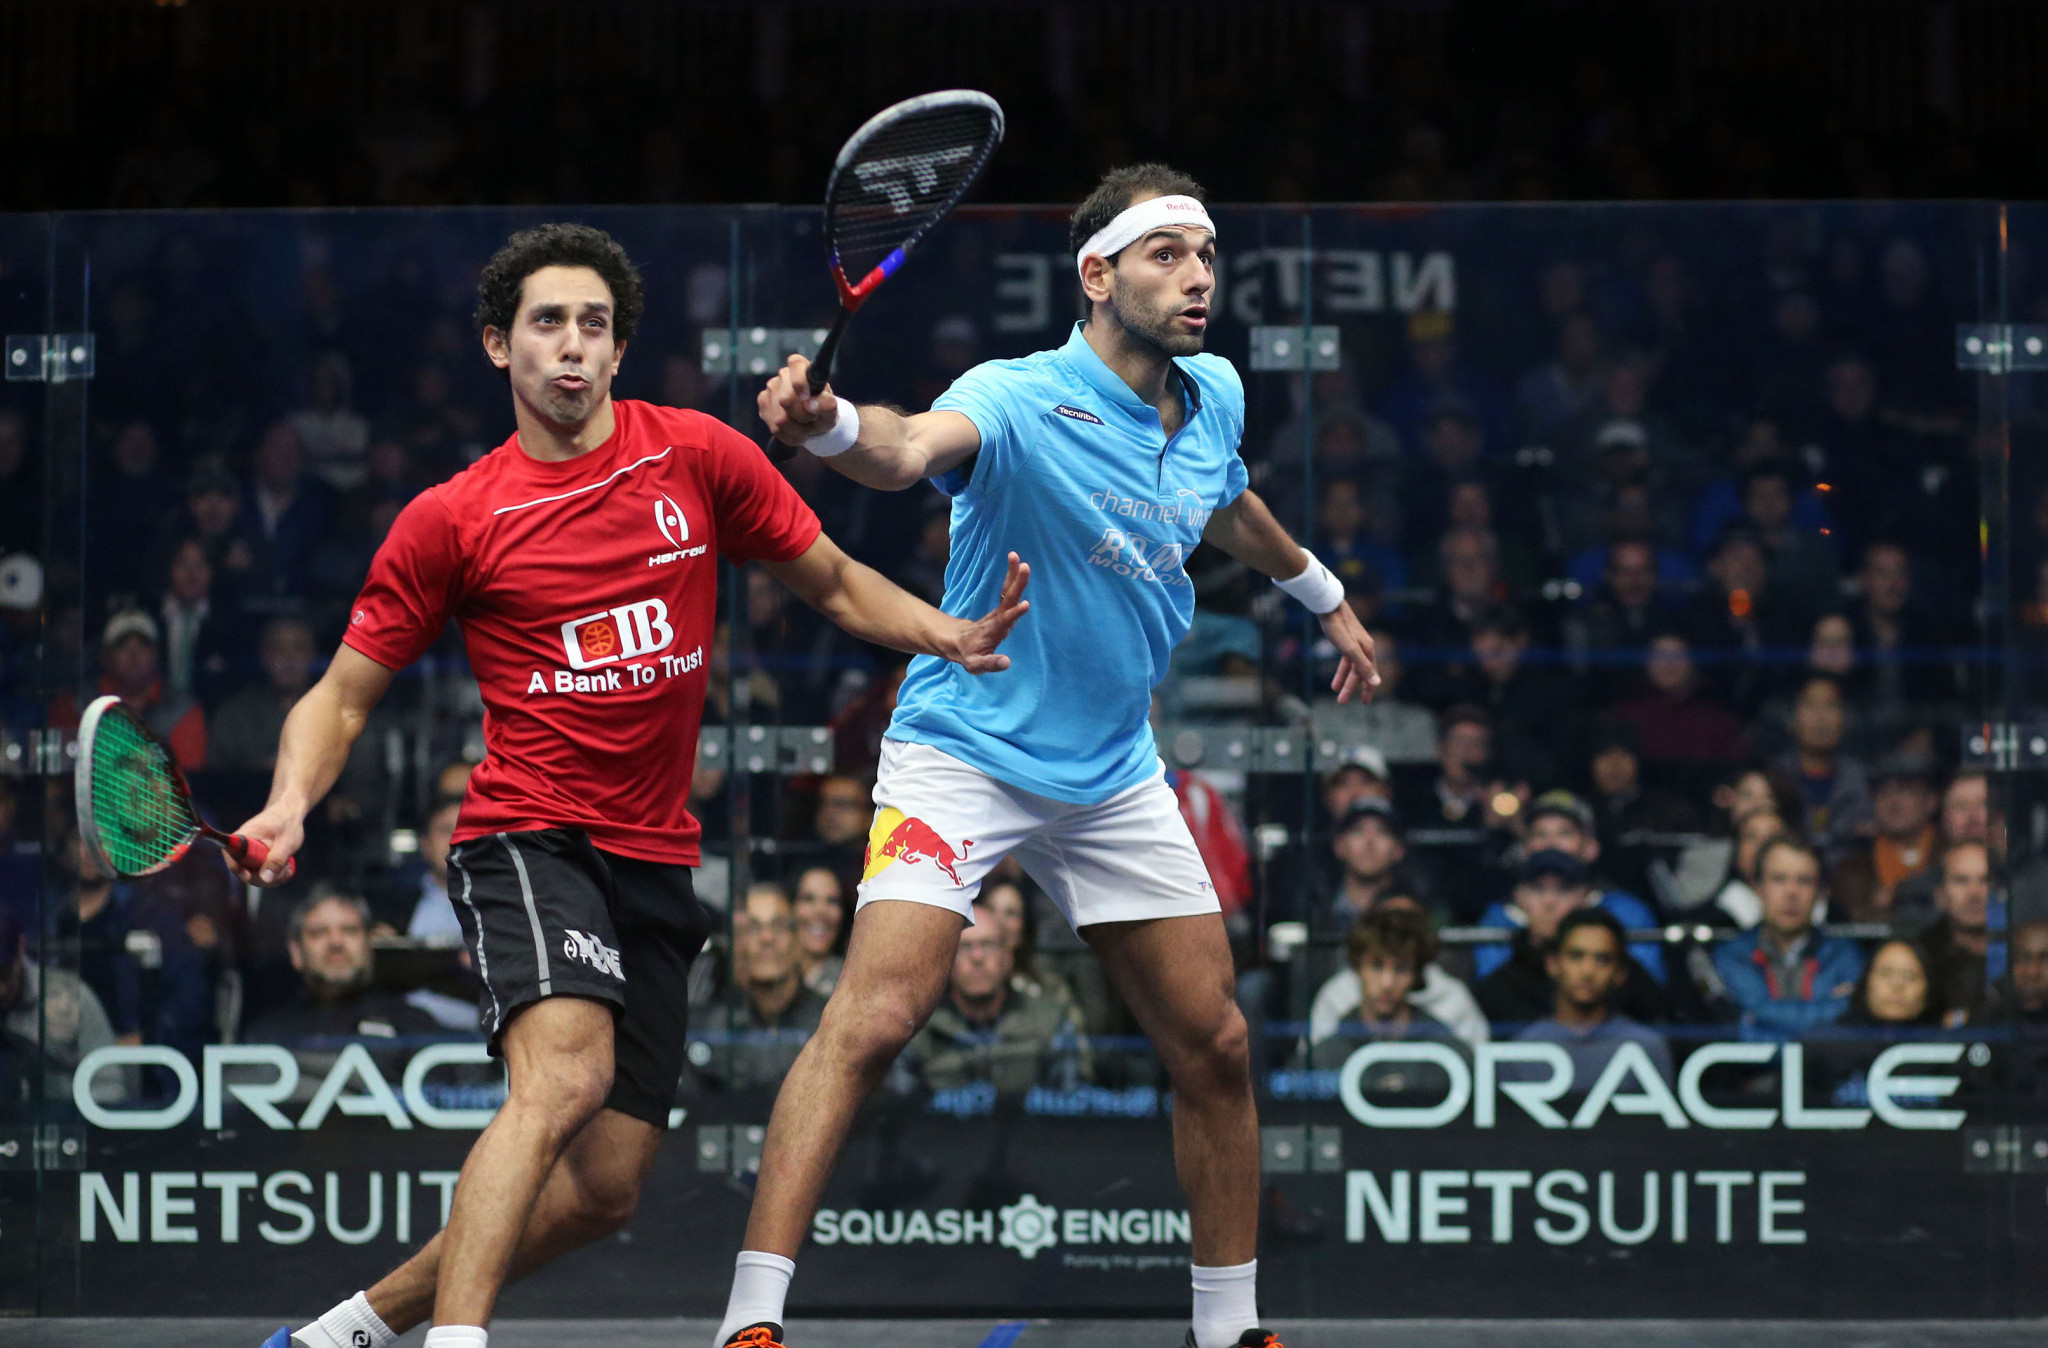 World number one Mohamed ElShorbagy won a second Oracle Netsuite Open title in San Francisco ©PSA